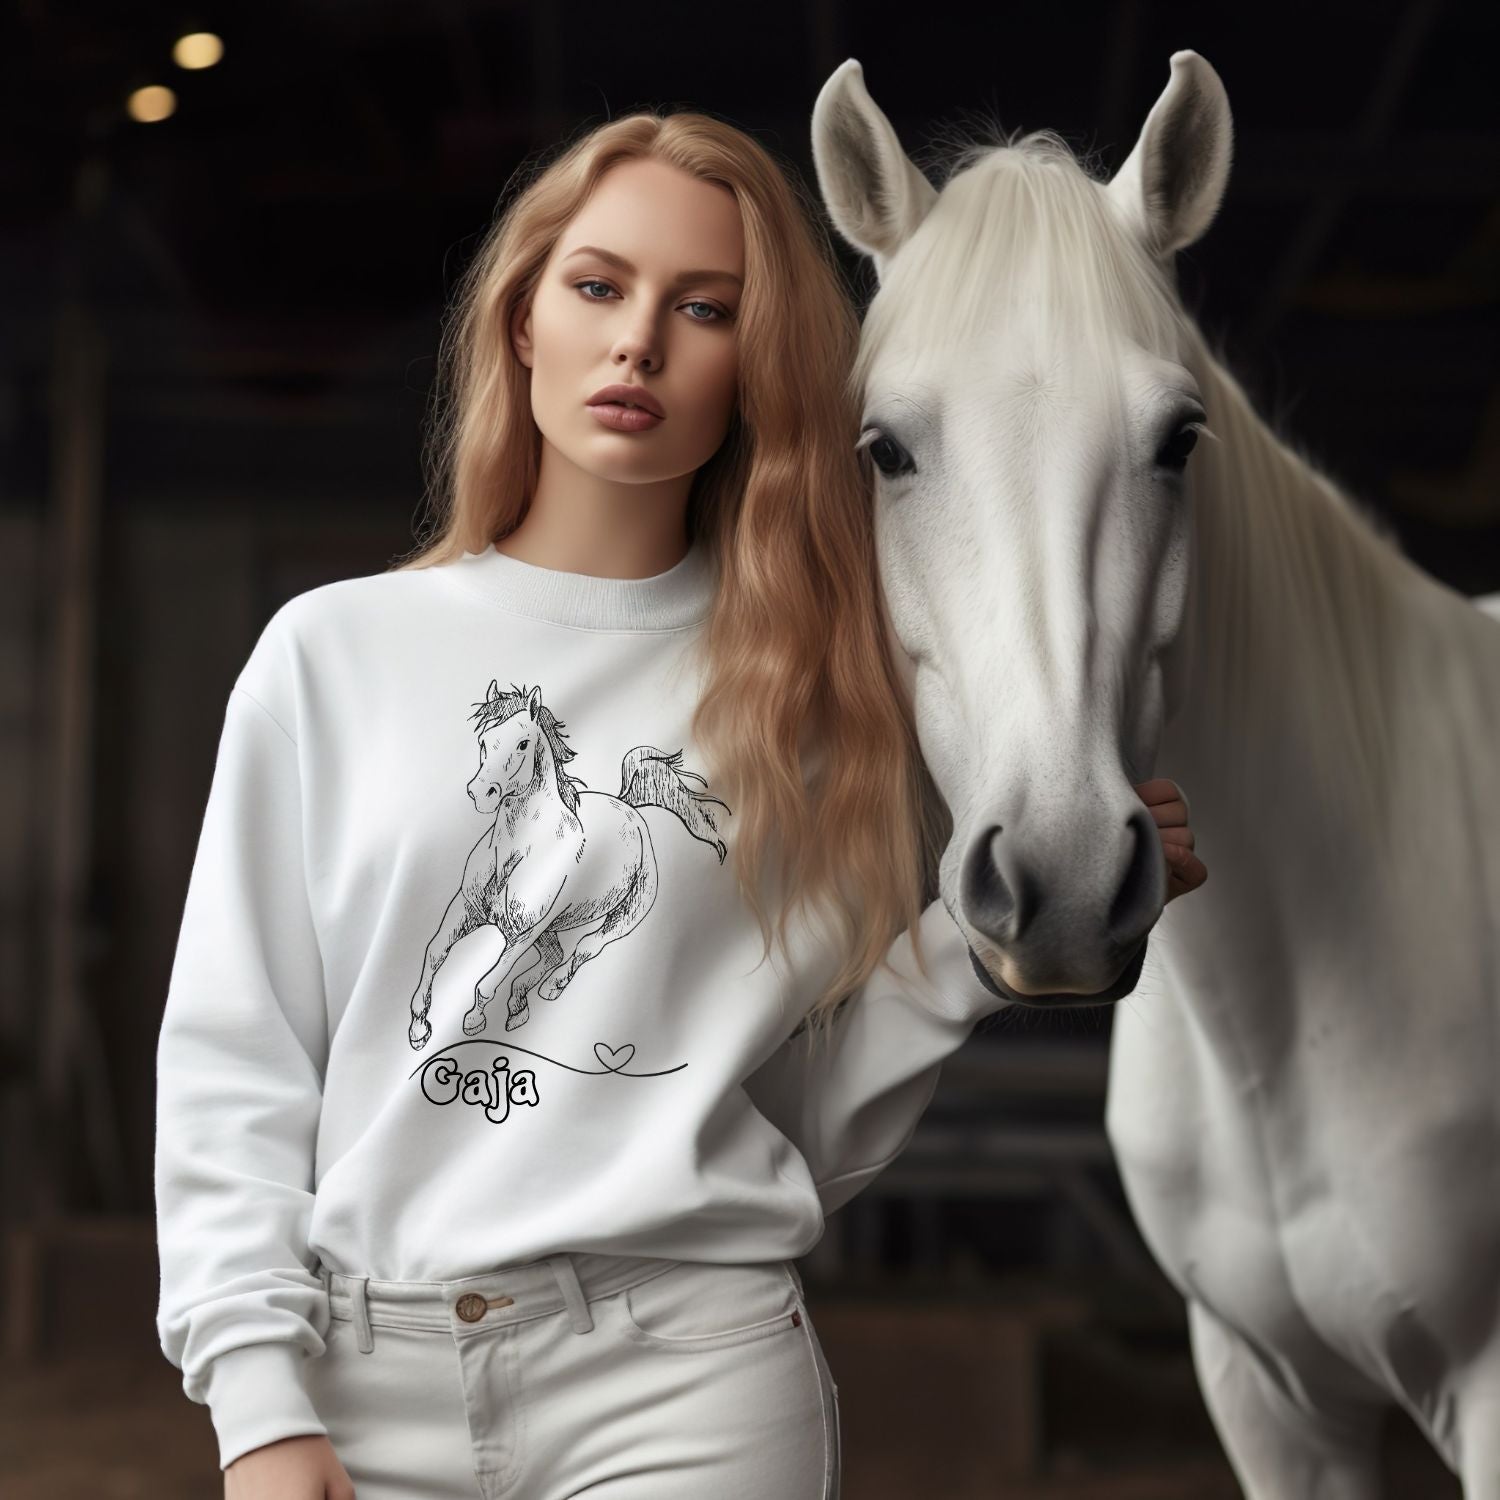 Personalized Horse Sweatshirt - Gift for Horse Owner, Perfect for Christmas, Birthdays, and Equestrian Enthusiasts - Wrap Up Warmth and Personal Connection with this Thoughtful Horse Lover's Gift Sweatshirt   